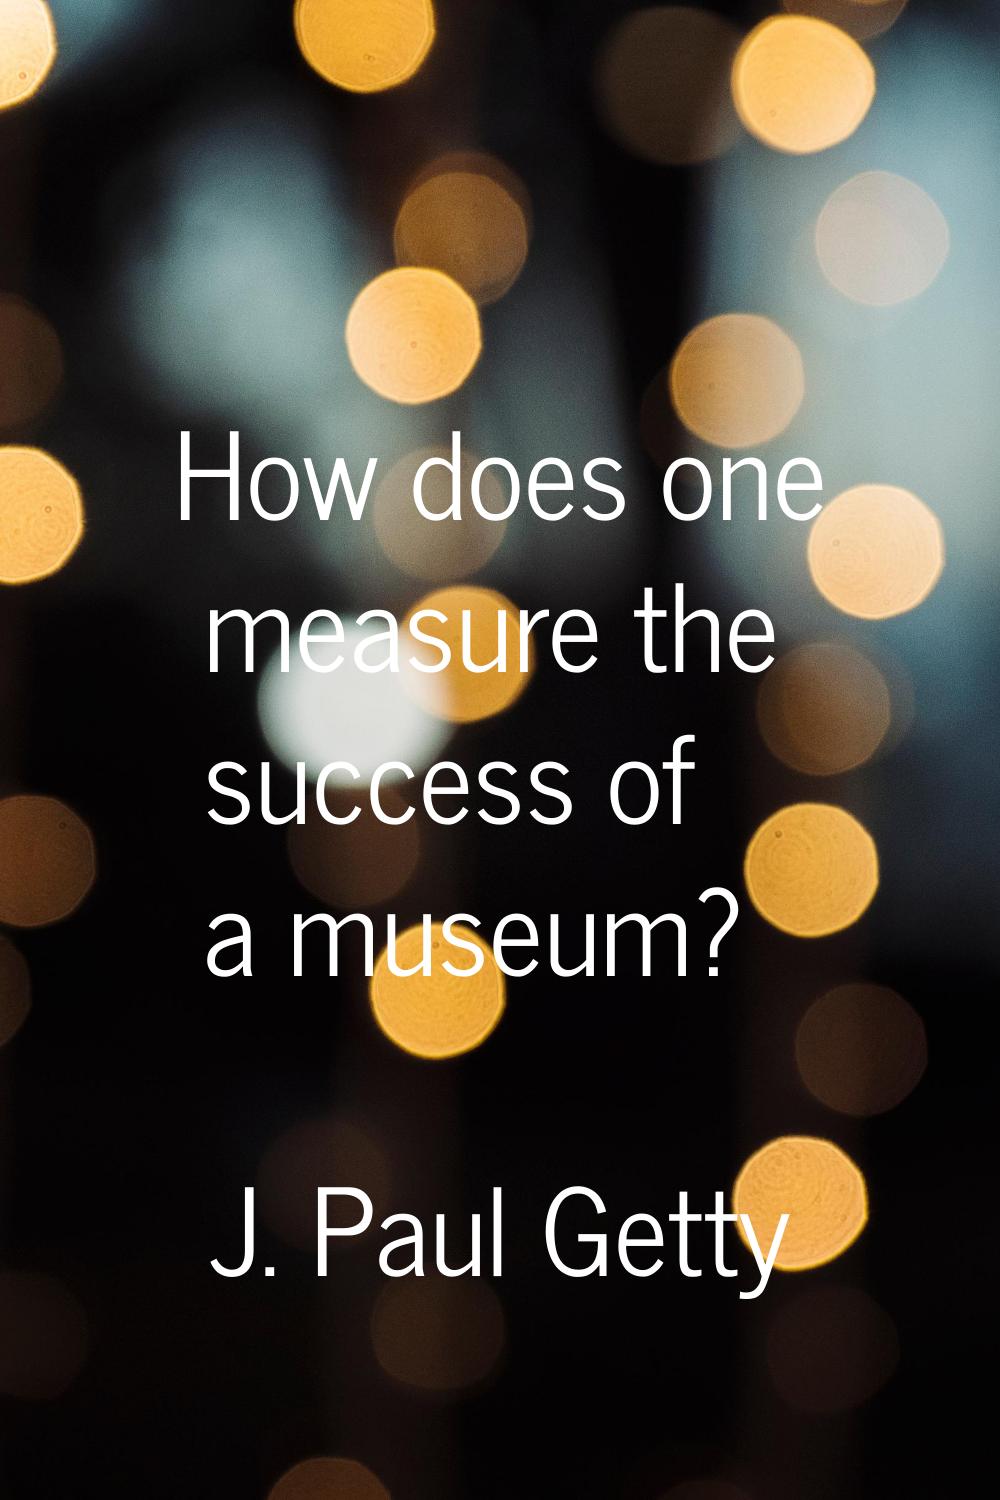 How does one measure the success of a museum?